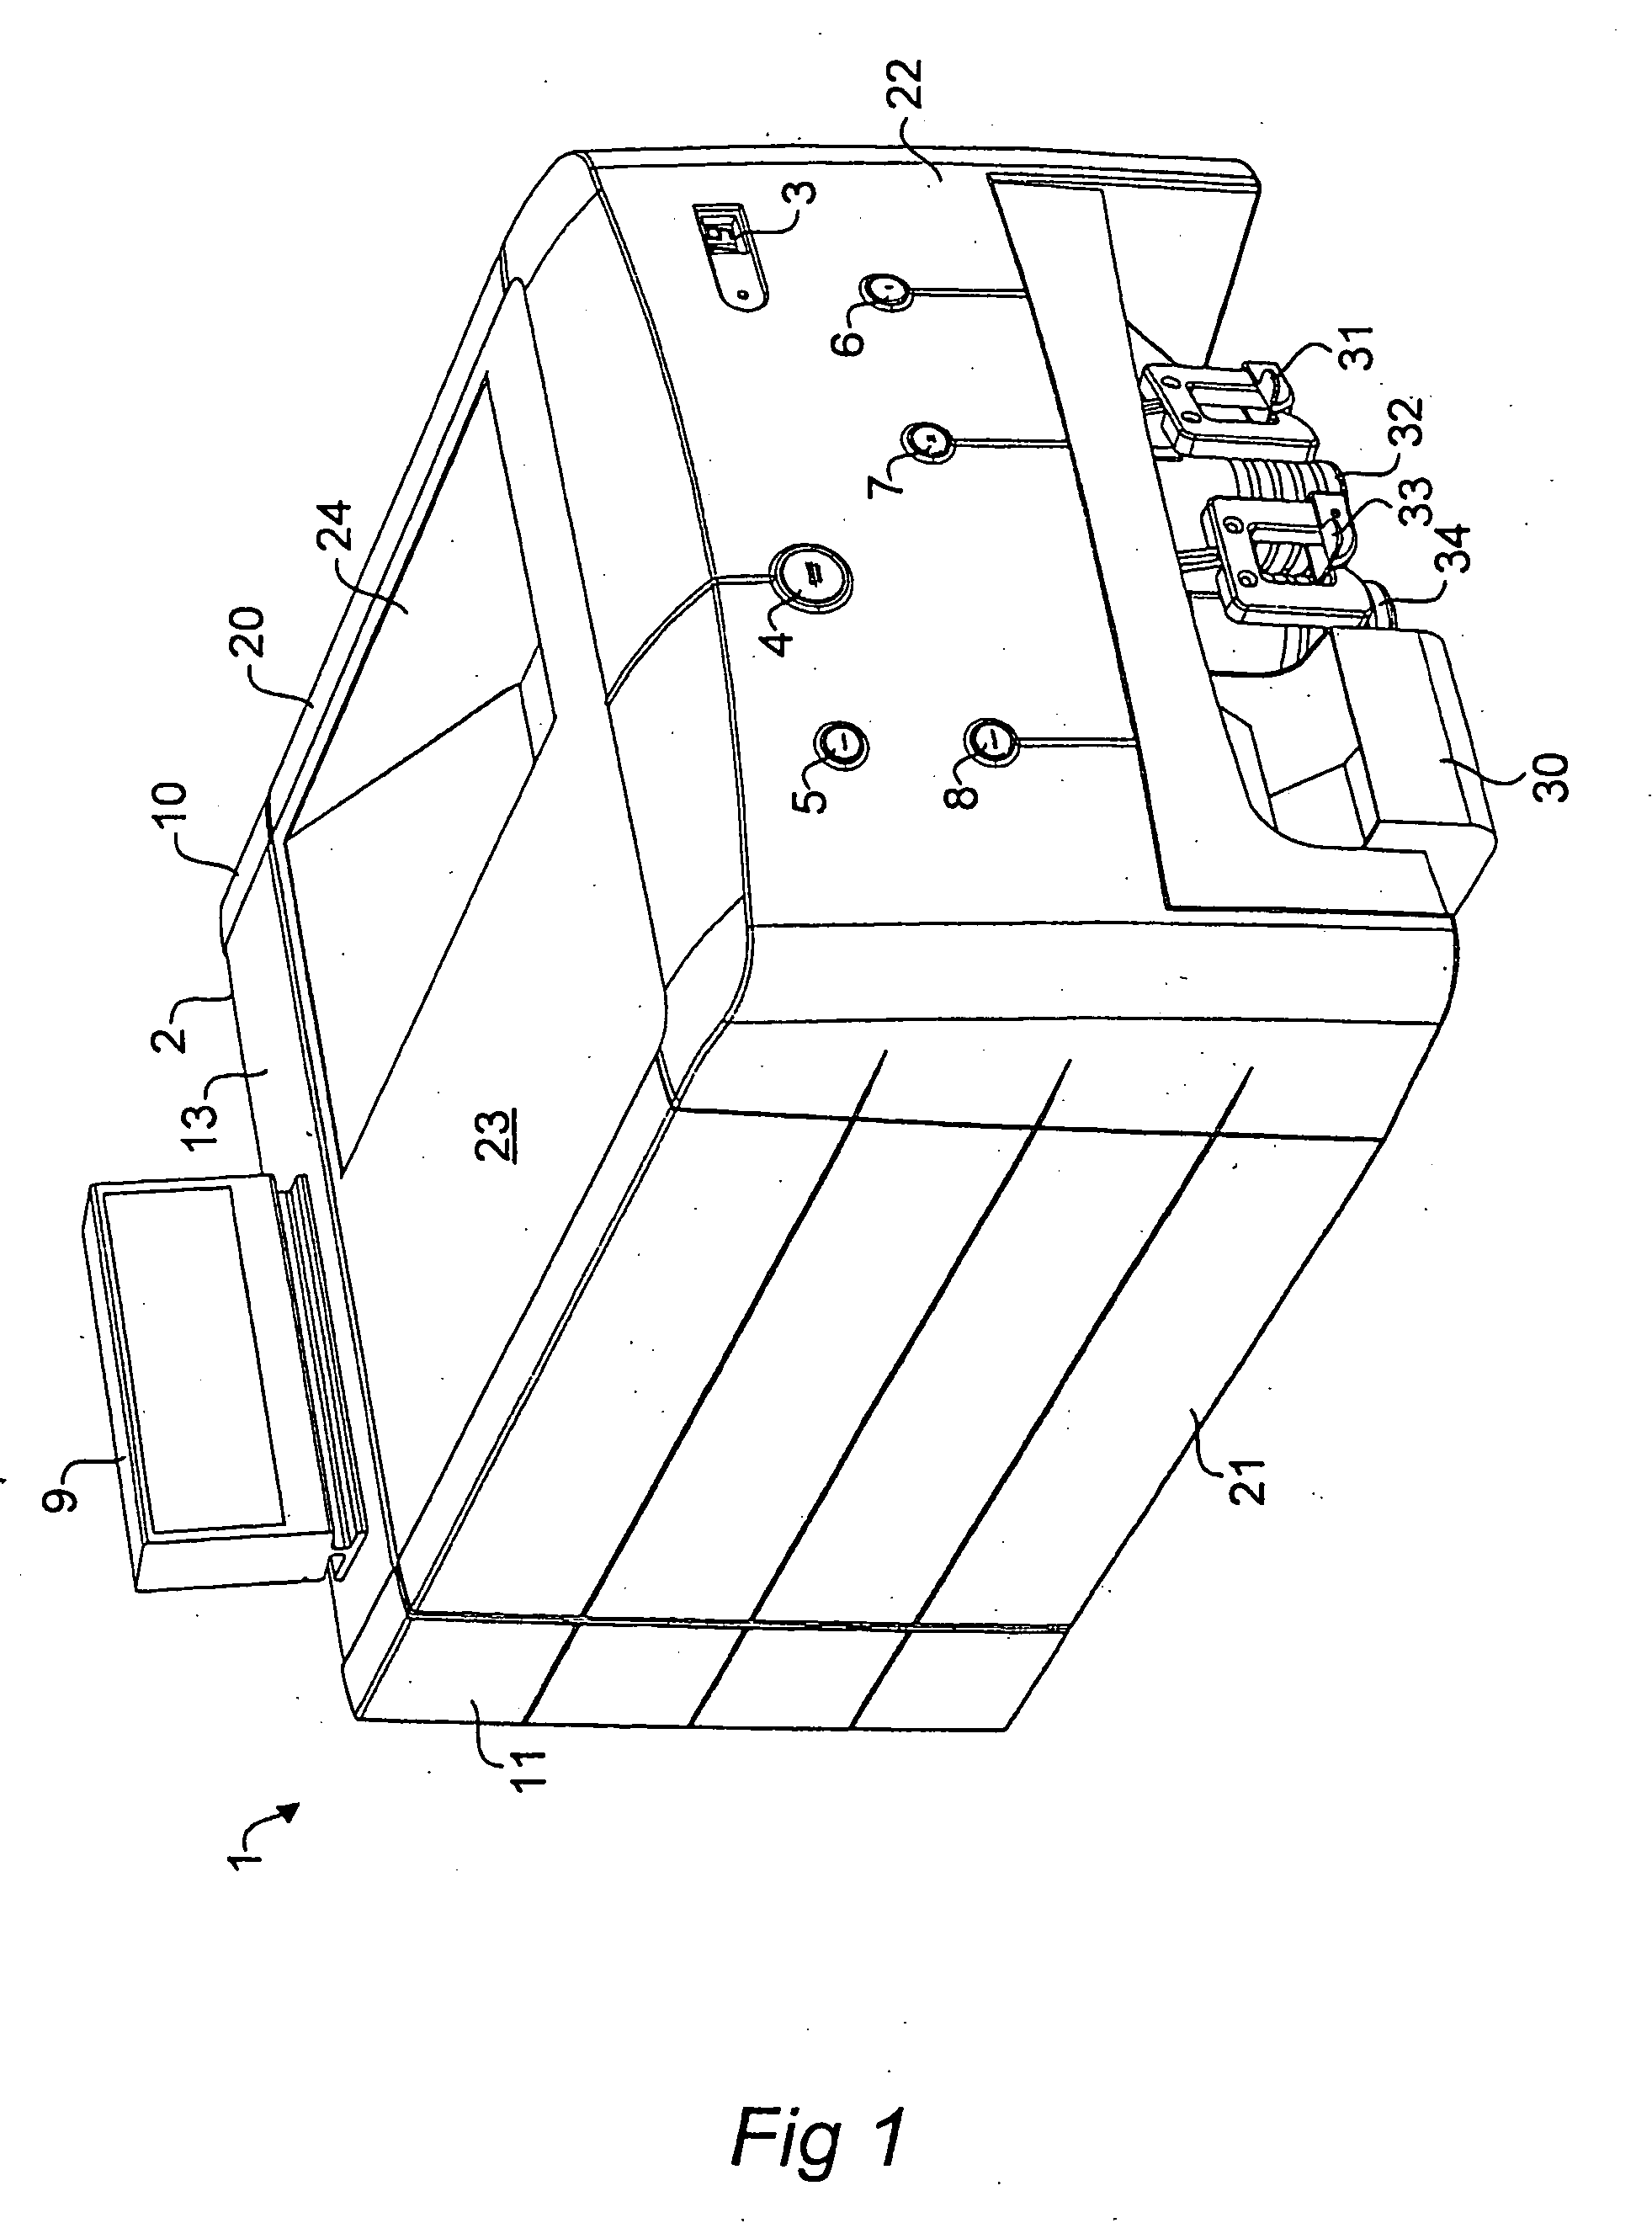 Coin handling apparatus with means for deflecting non-separated valid coins